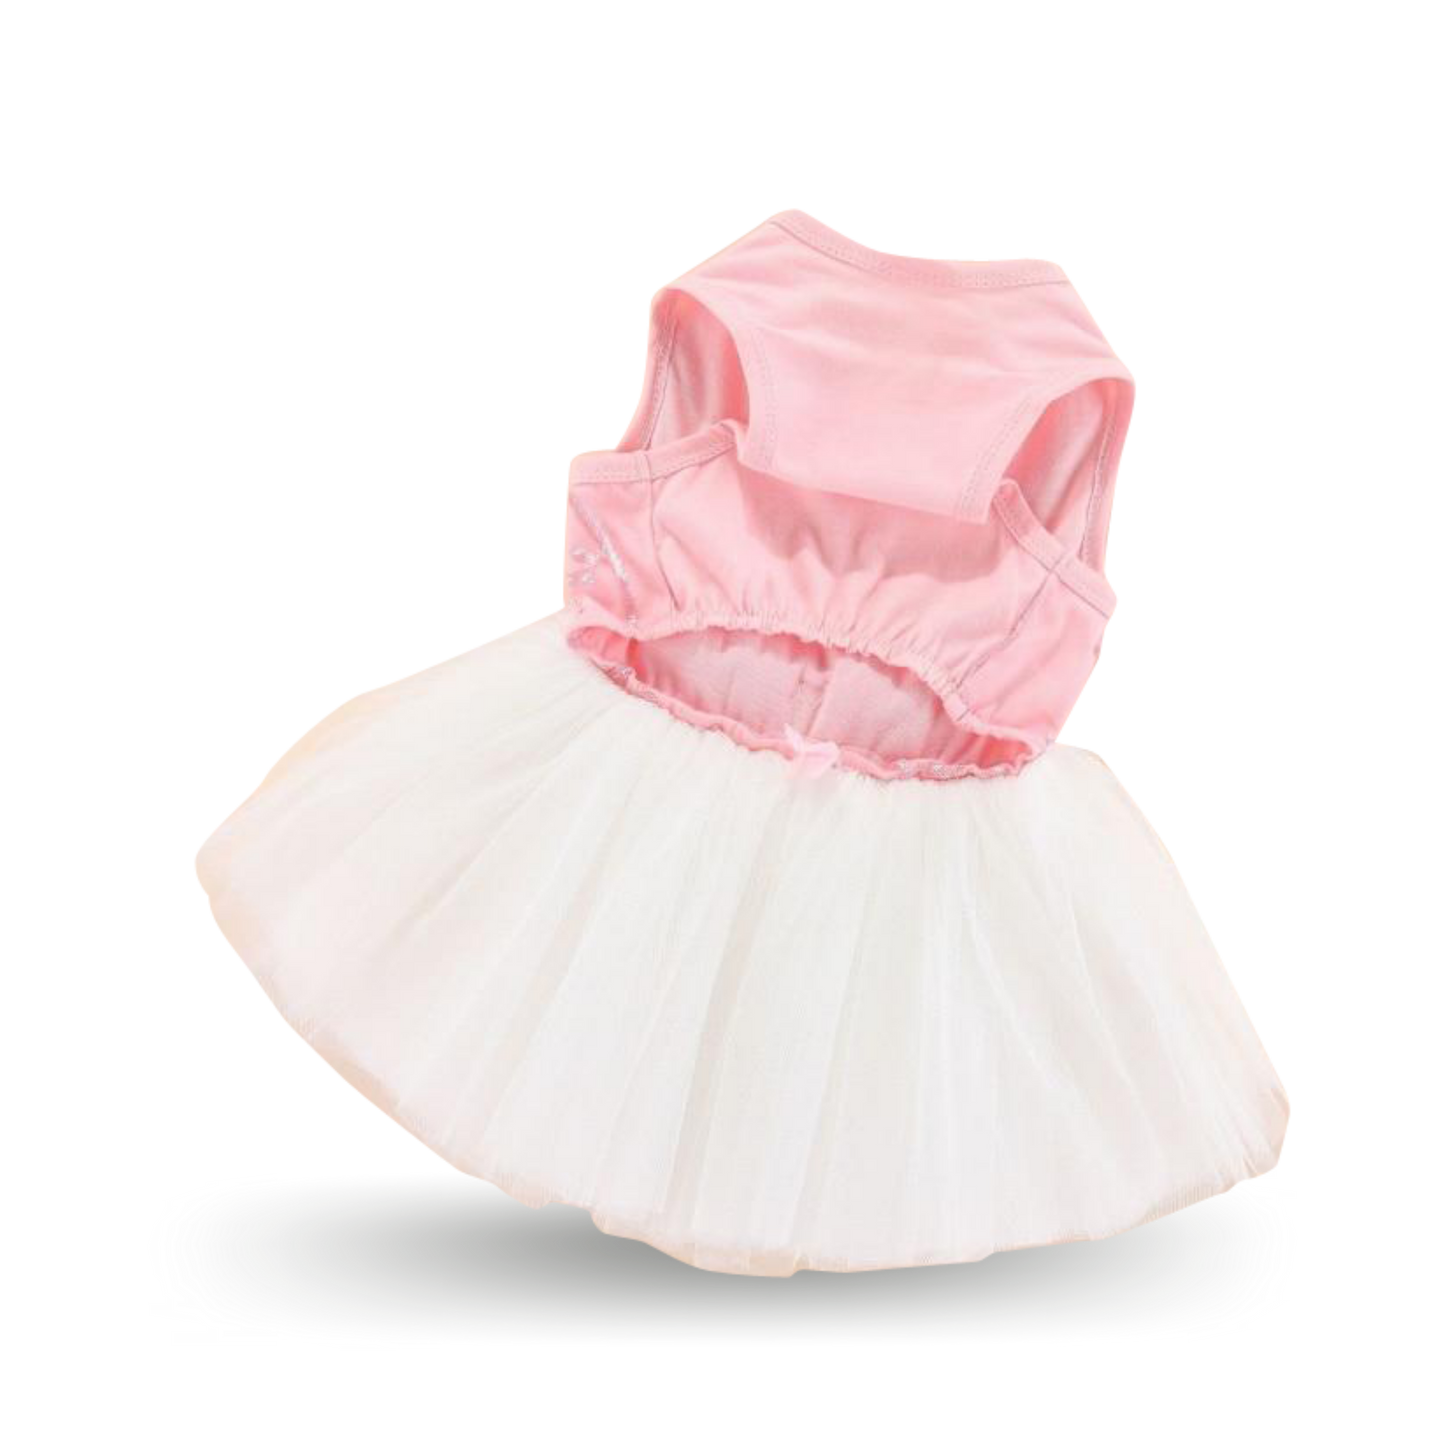 Soft pink cotton bodice with a fine embroidered mesh overlay, with pretty multi-layered white tulle skirt and pink tulle bowtie at the waist